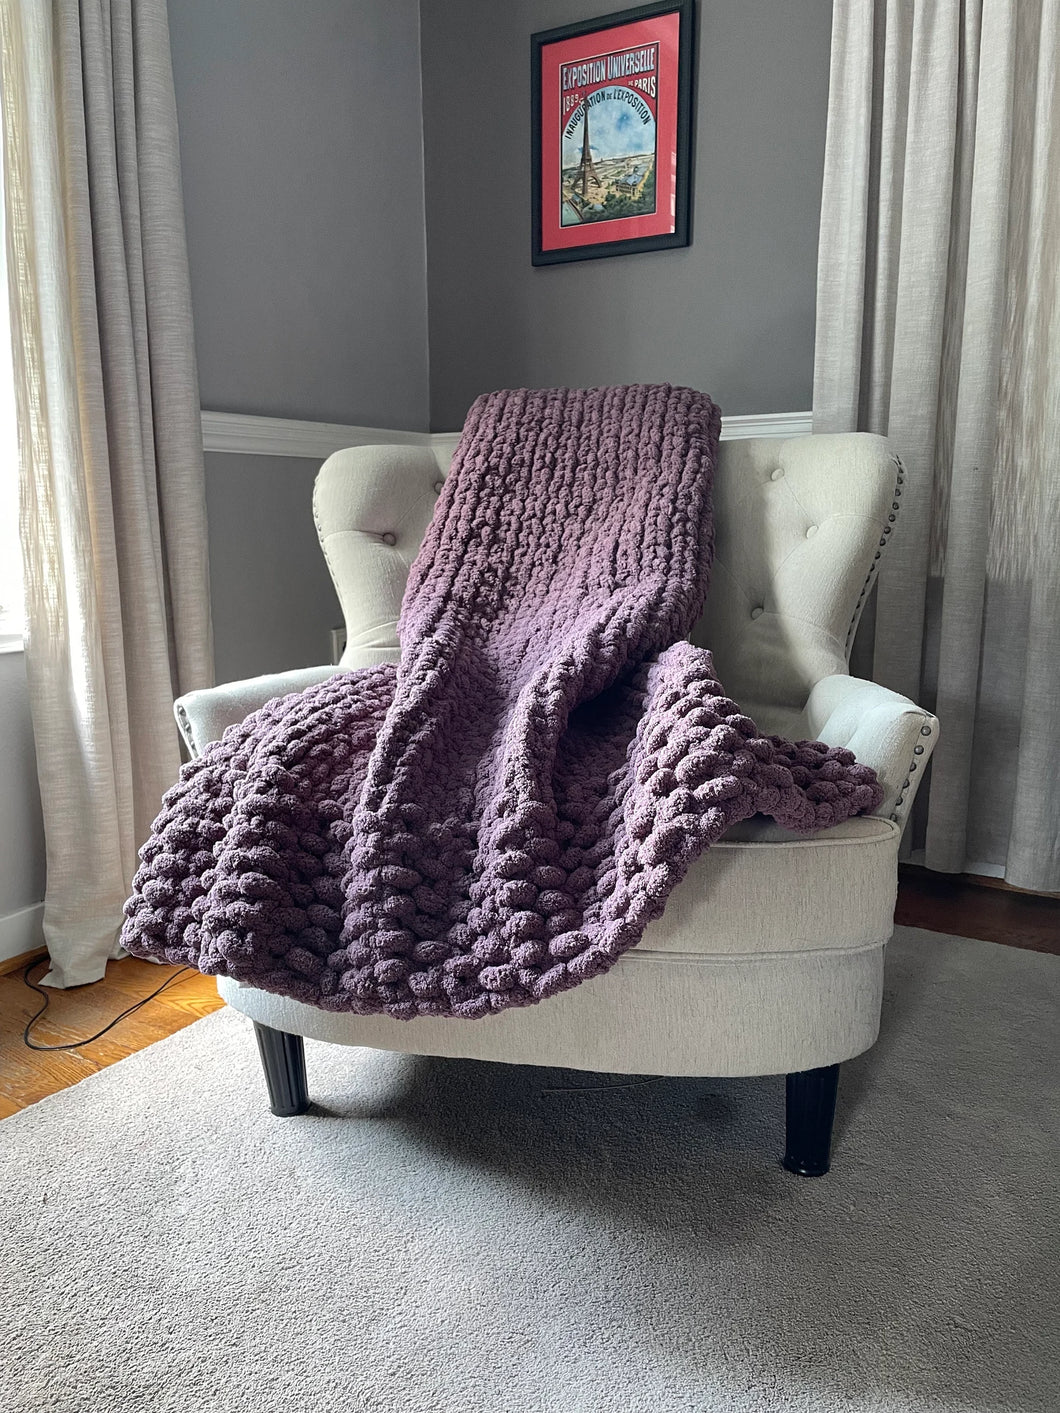 Smoky Amethyst Blanket | Chunky Knit Throw - Hands On For Homemade